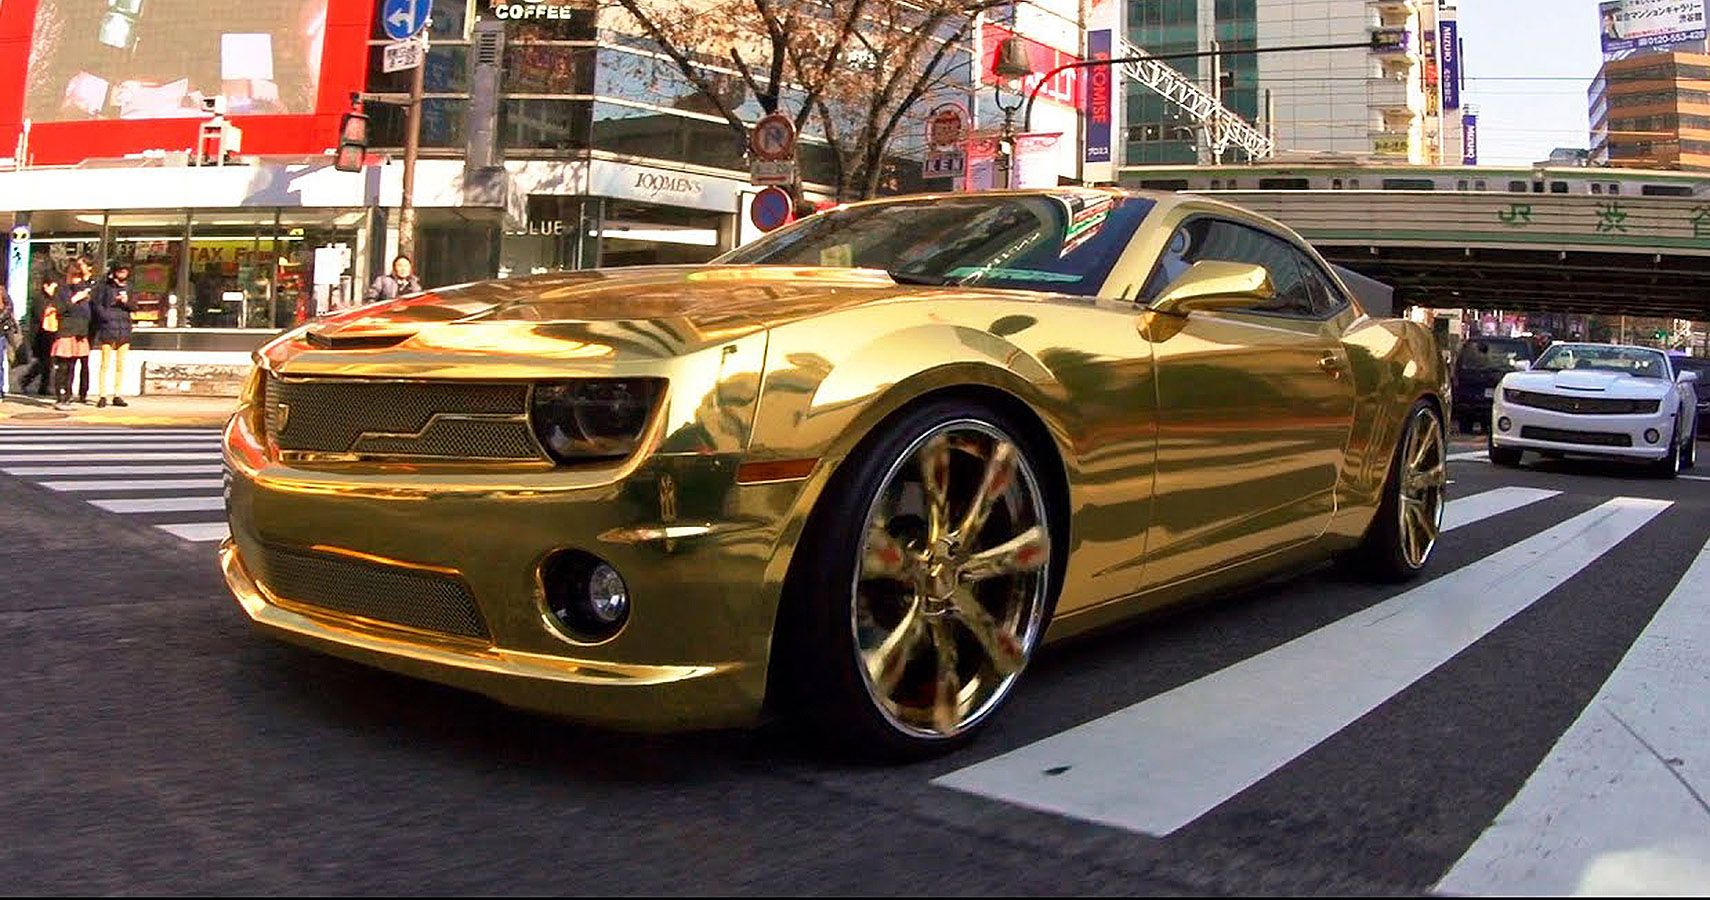 Far Too Much Bling-On One Poor Camaro